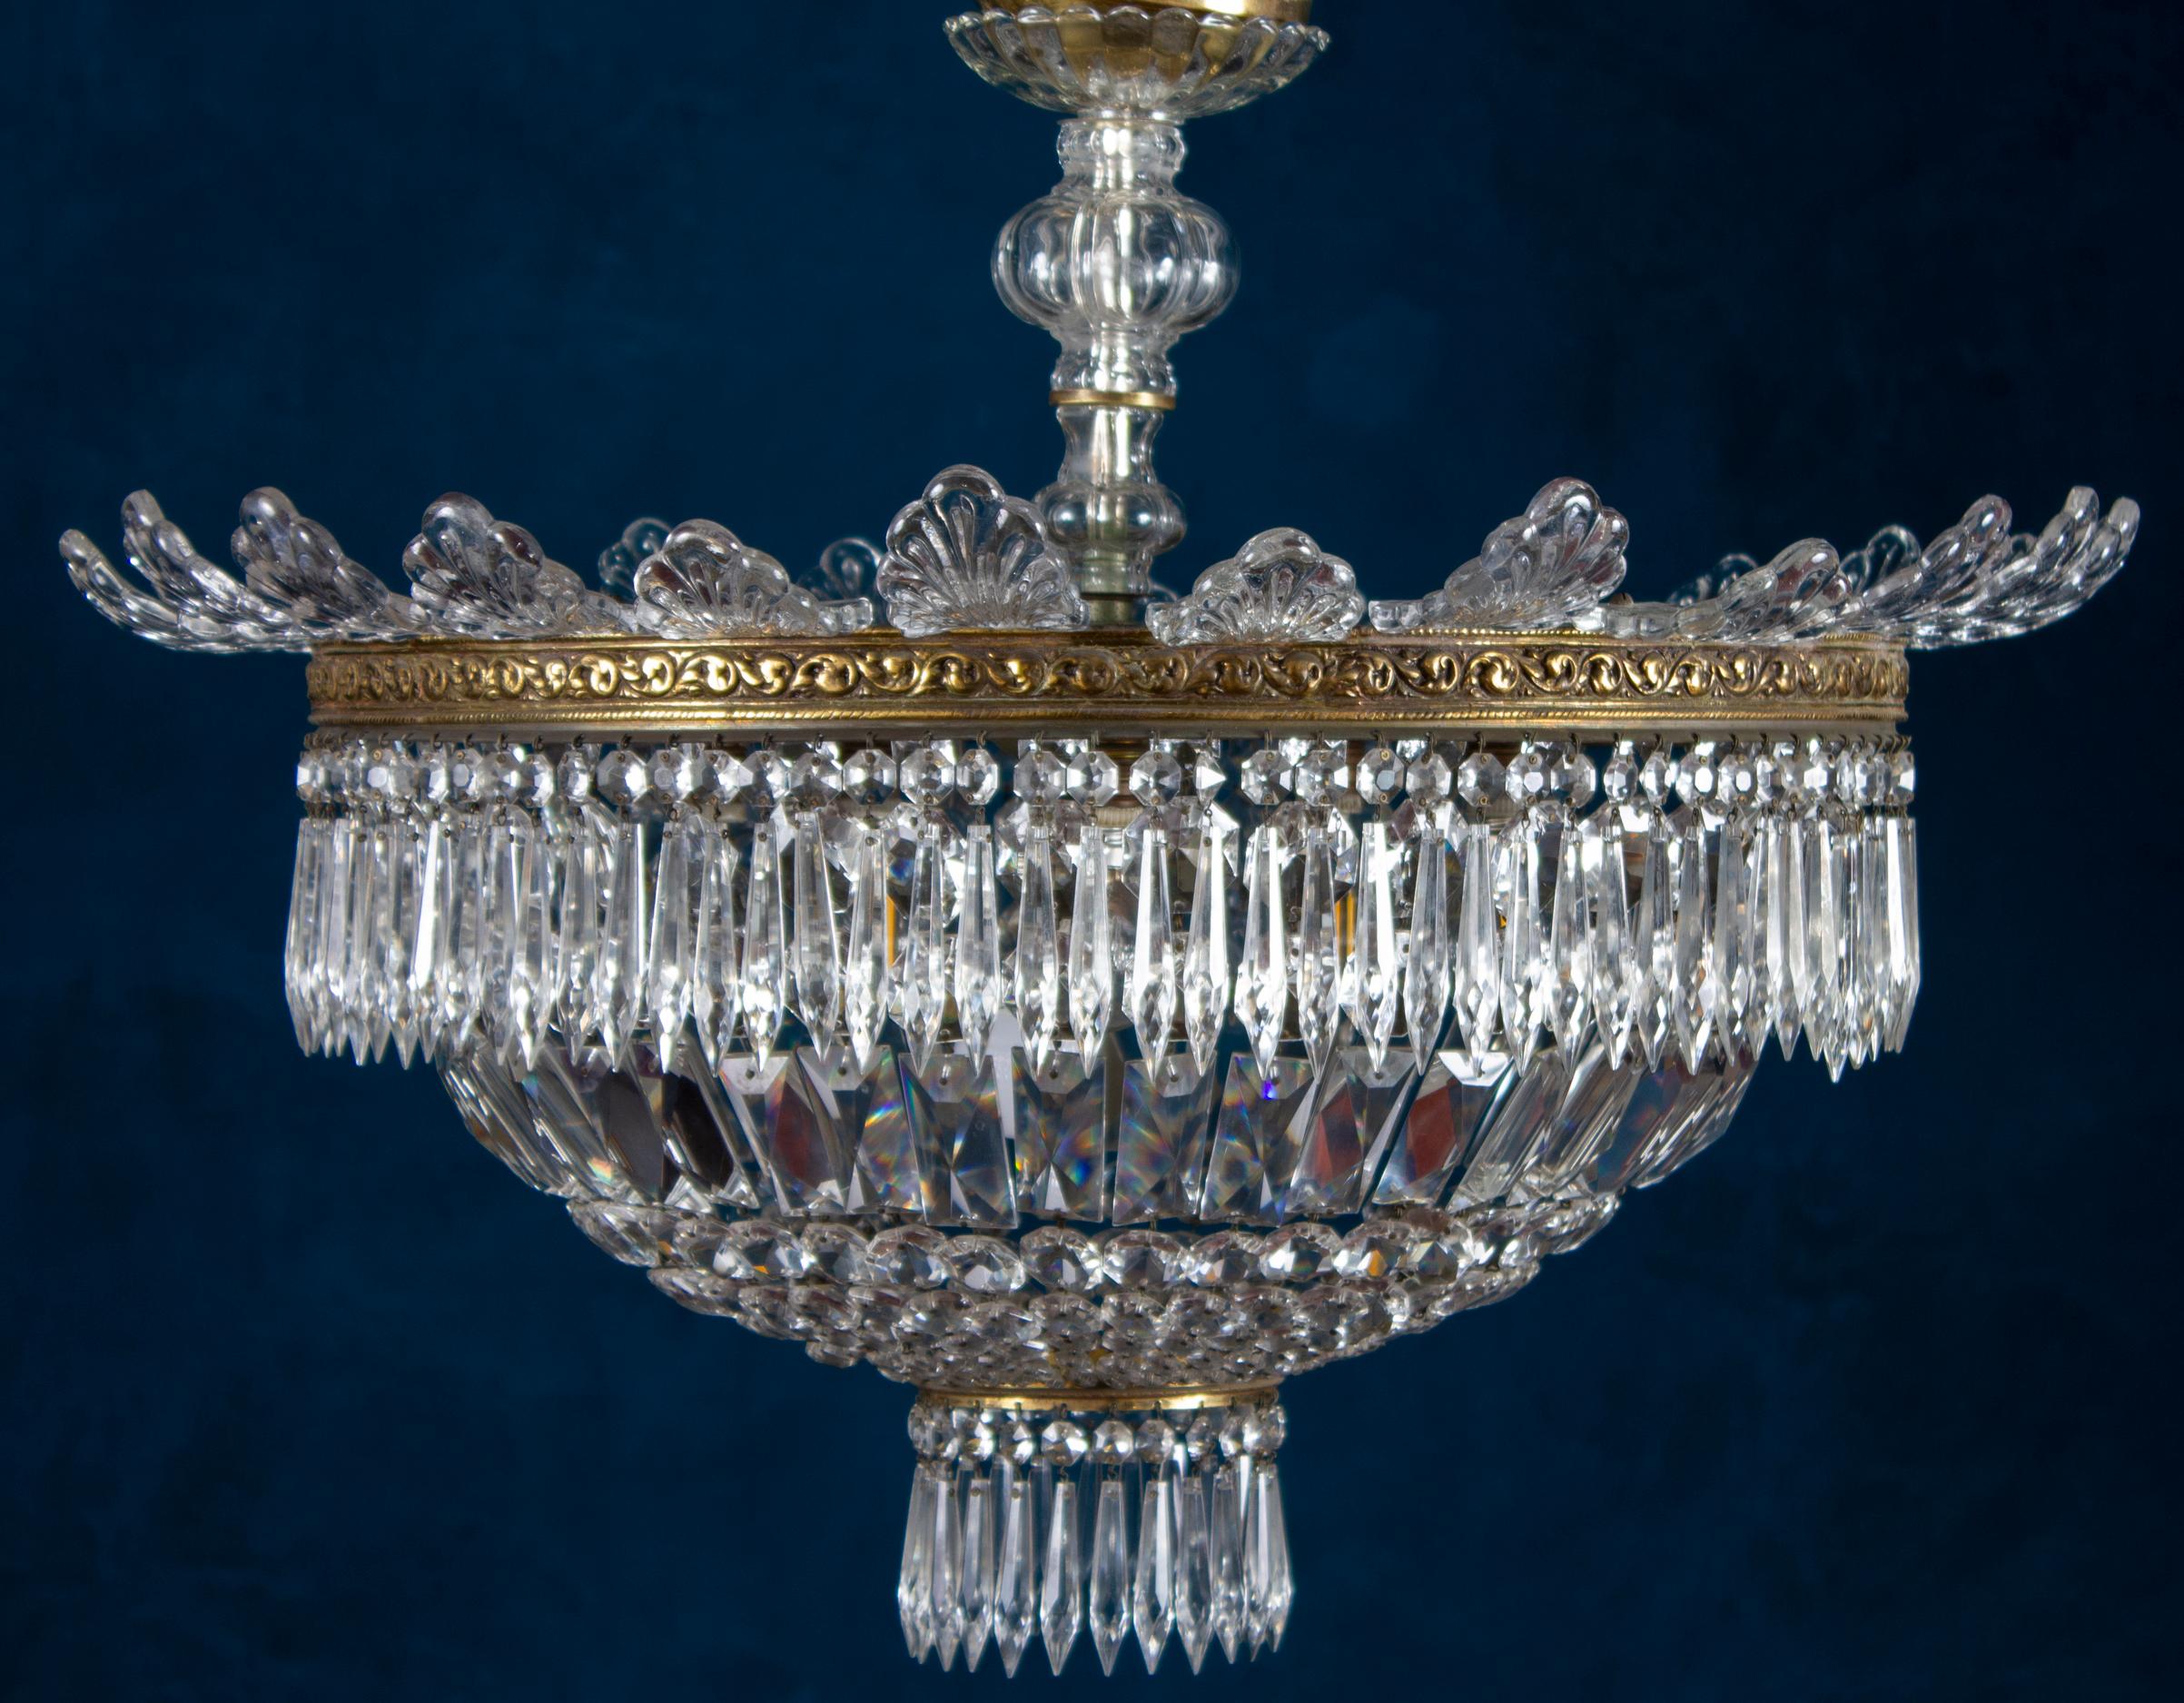 This Sumptuous chandelier supporting a set of precious cut crystal prisms, octagons, oak leaves etc. Matching bronze gilded chain and a ceiling canopy.
Ideal for a reception room, dining room or entrance hall centerpiece.
8 Light bulbs